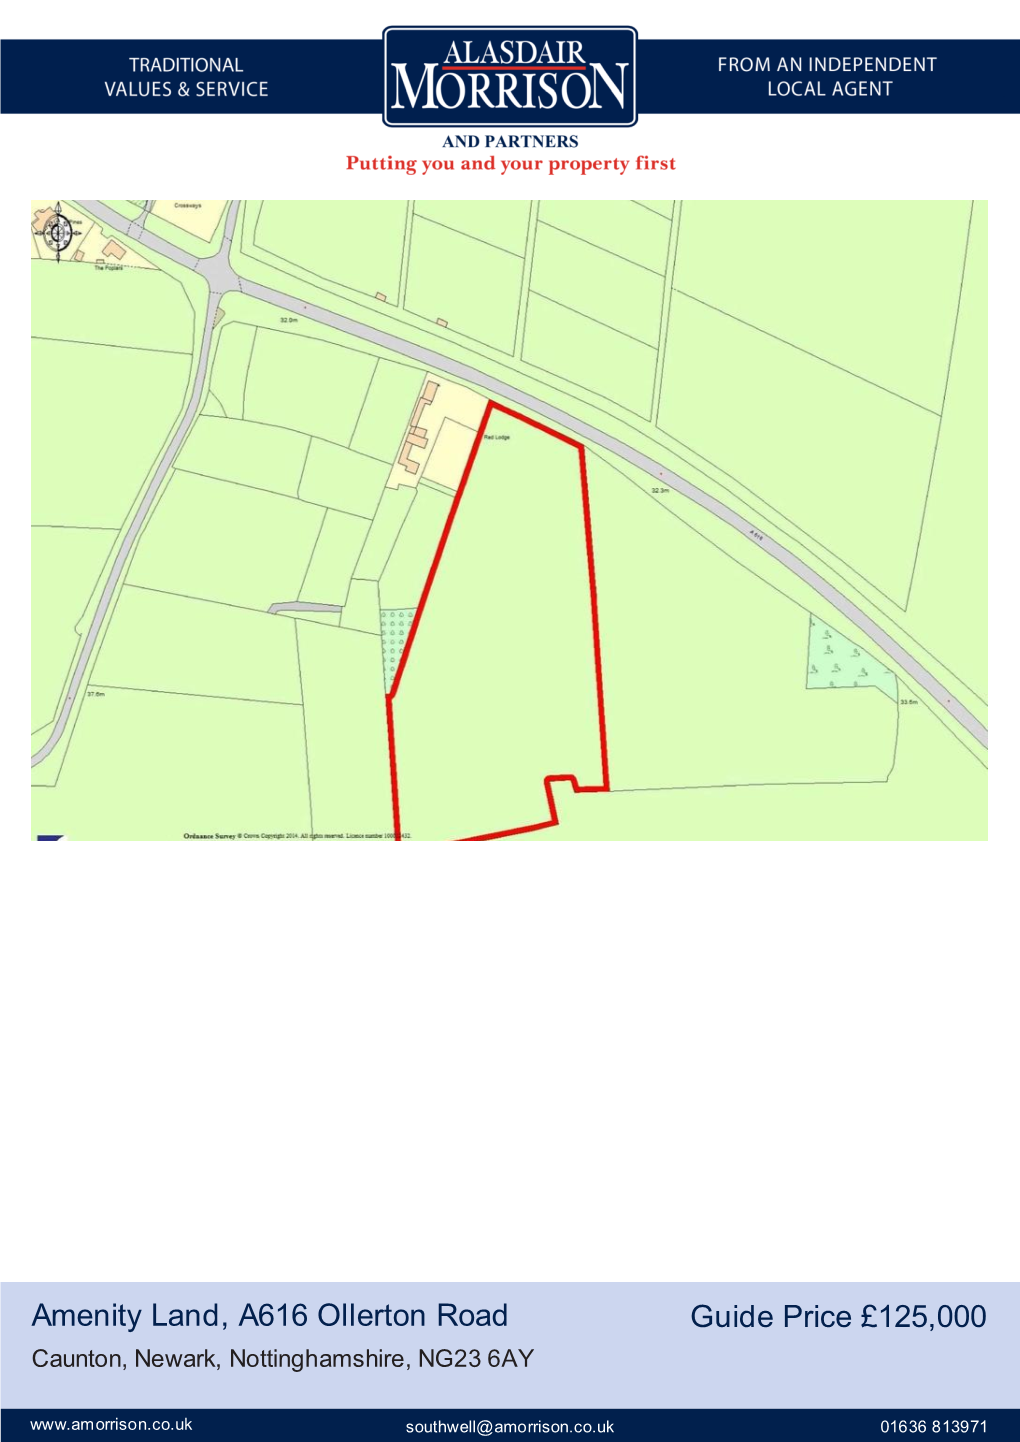 Guide Price £125,000 Amenity Land, A616 Ollerton Road